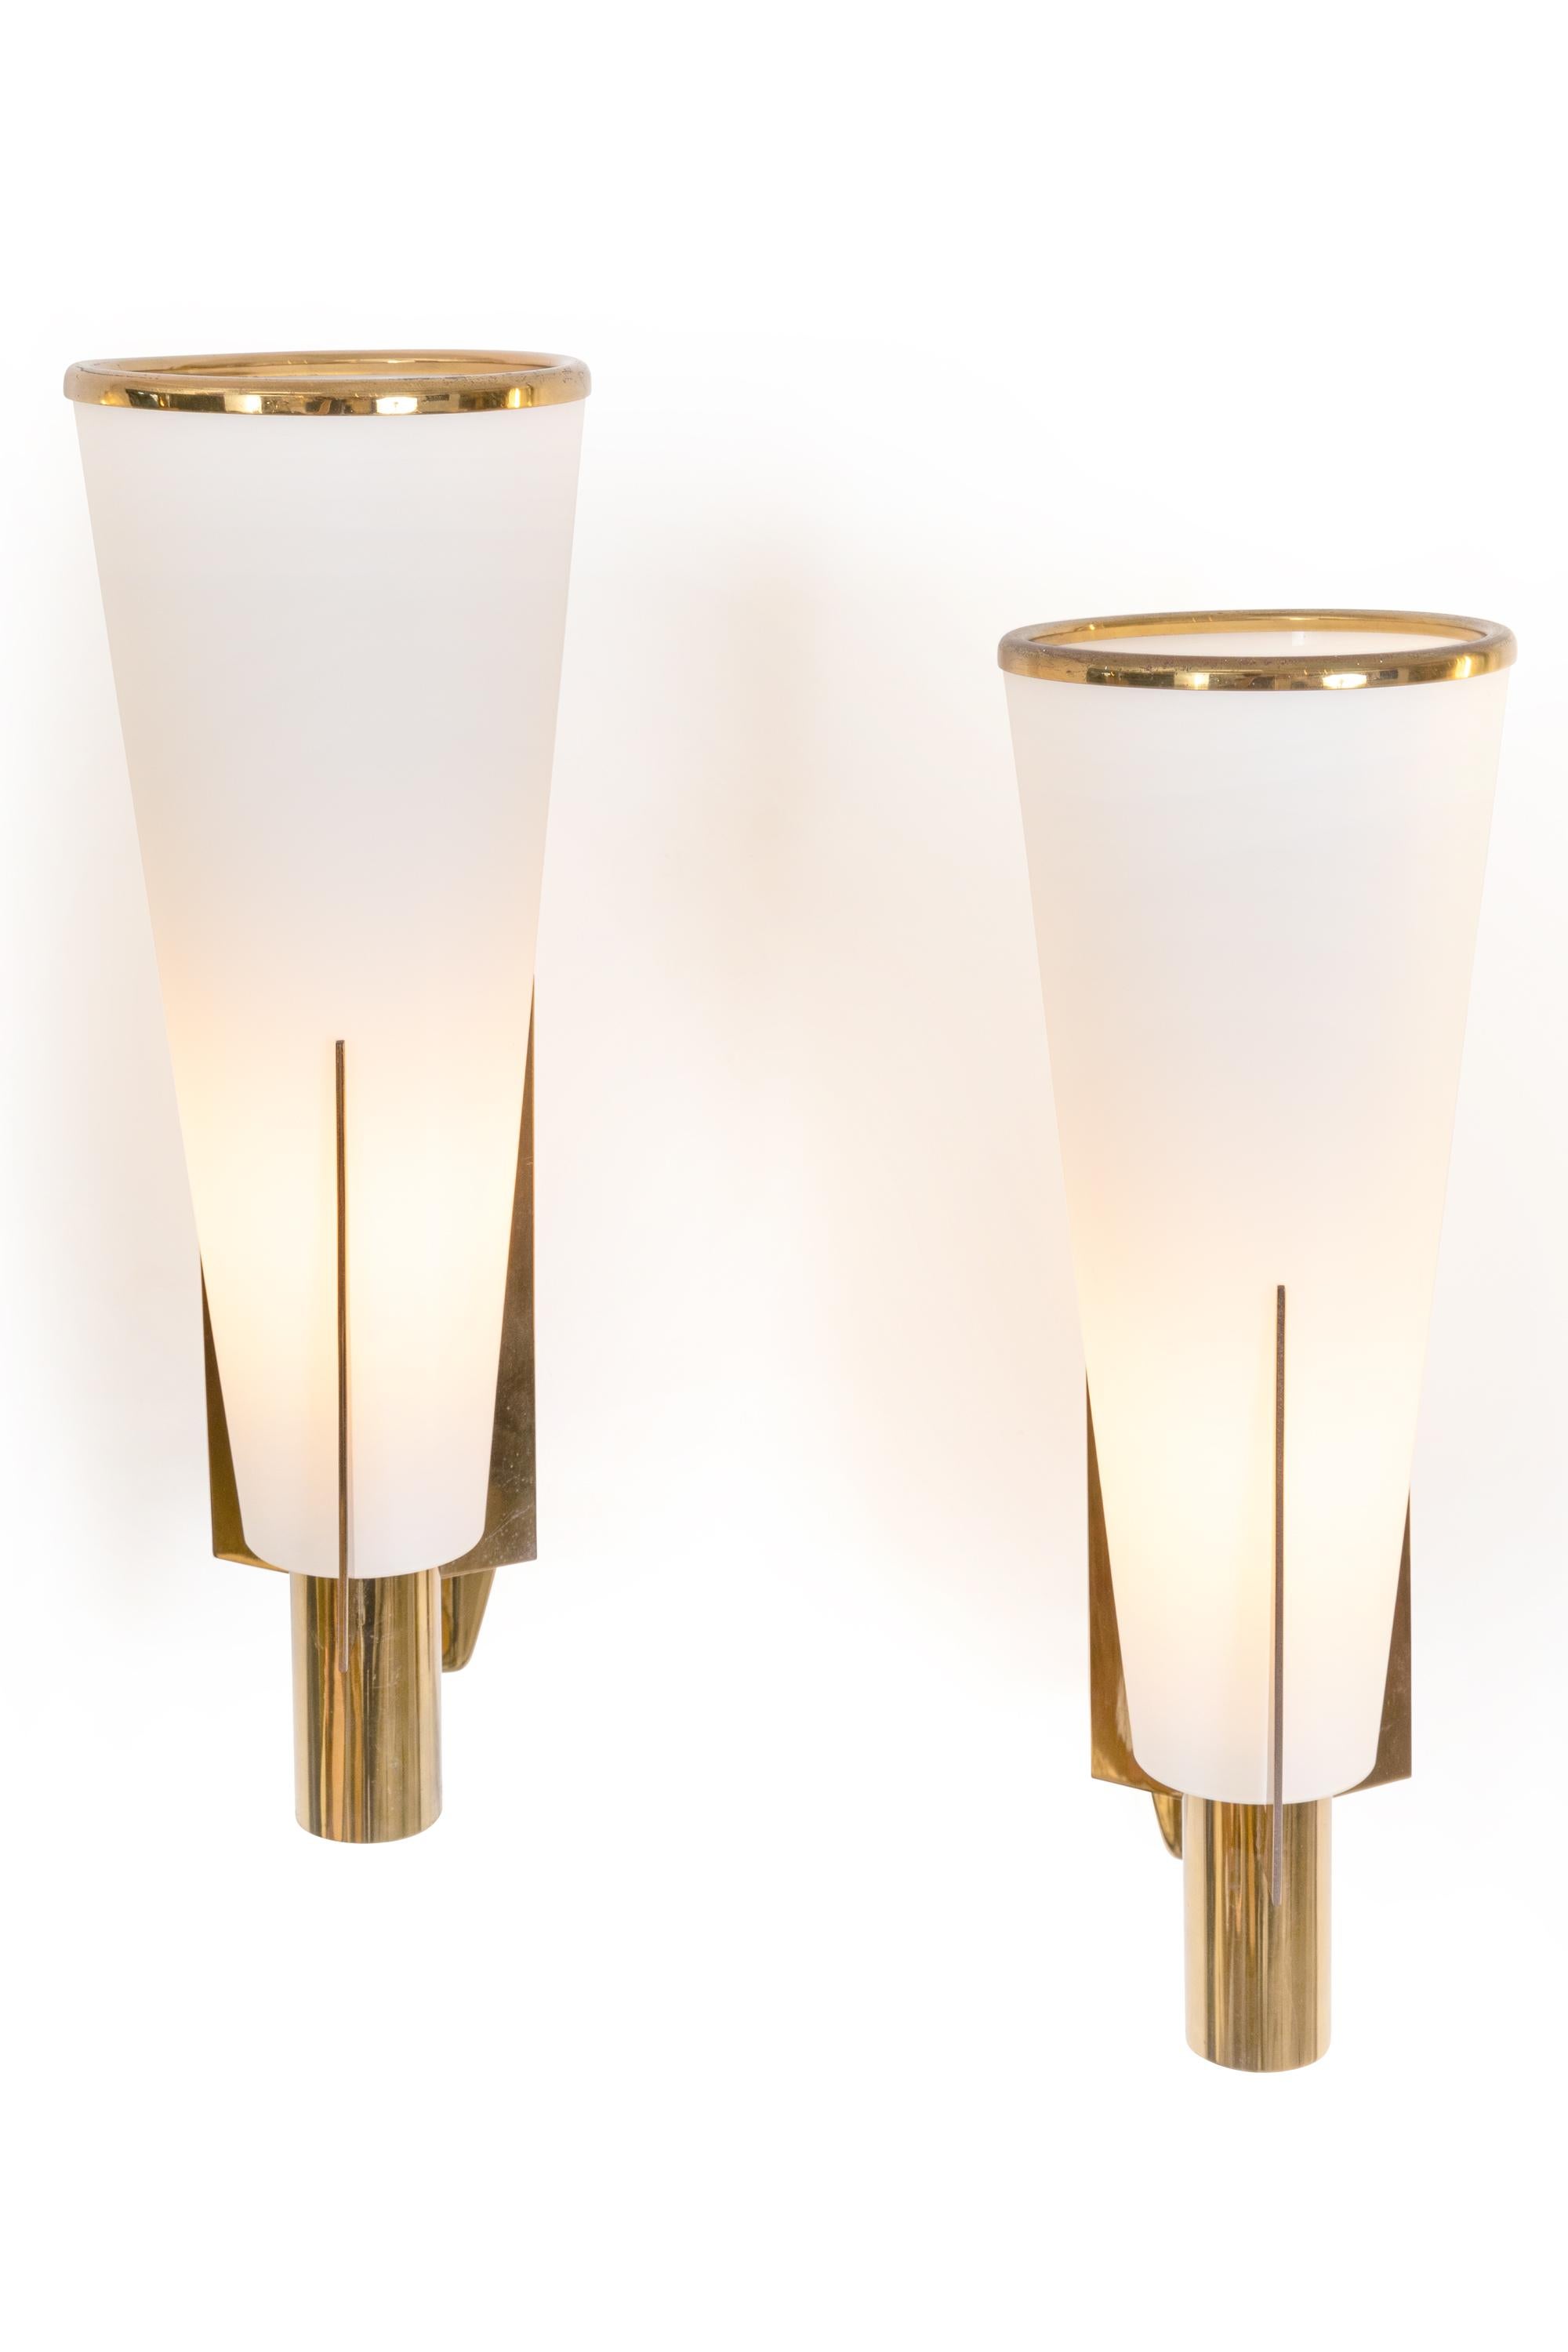 A simply elegant design and an impressive scale make these sconces a rare find. In original condition including the brass ring at the top of the tapered glass shade. Two pair are available.